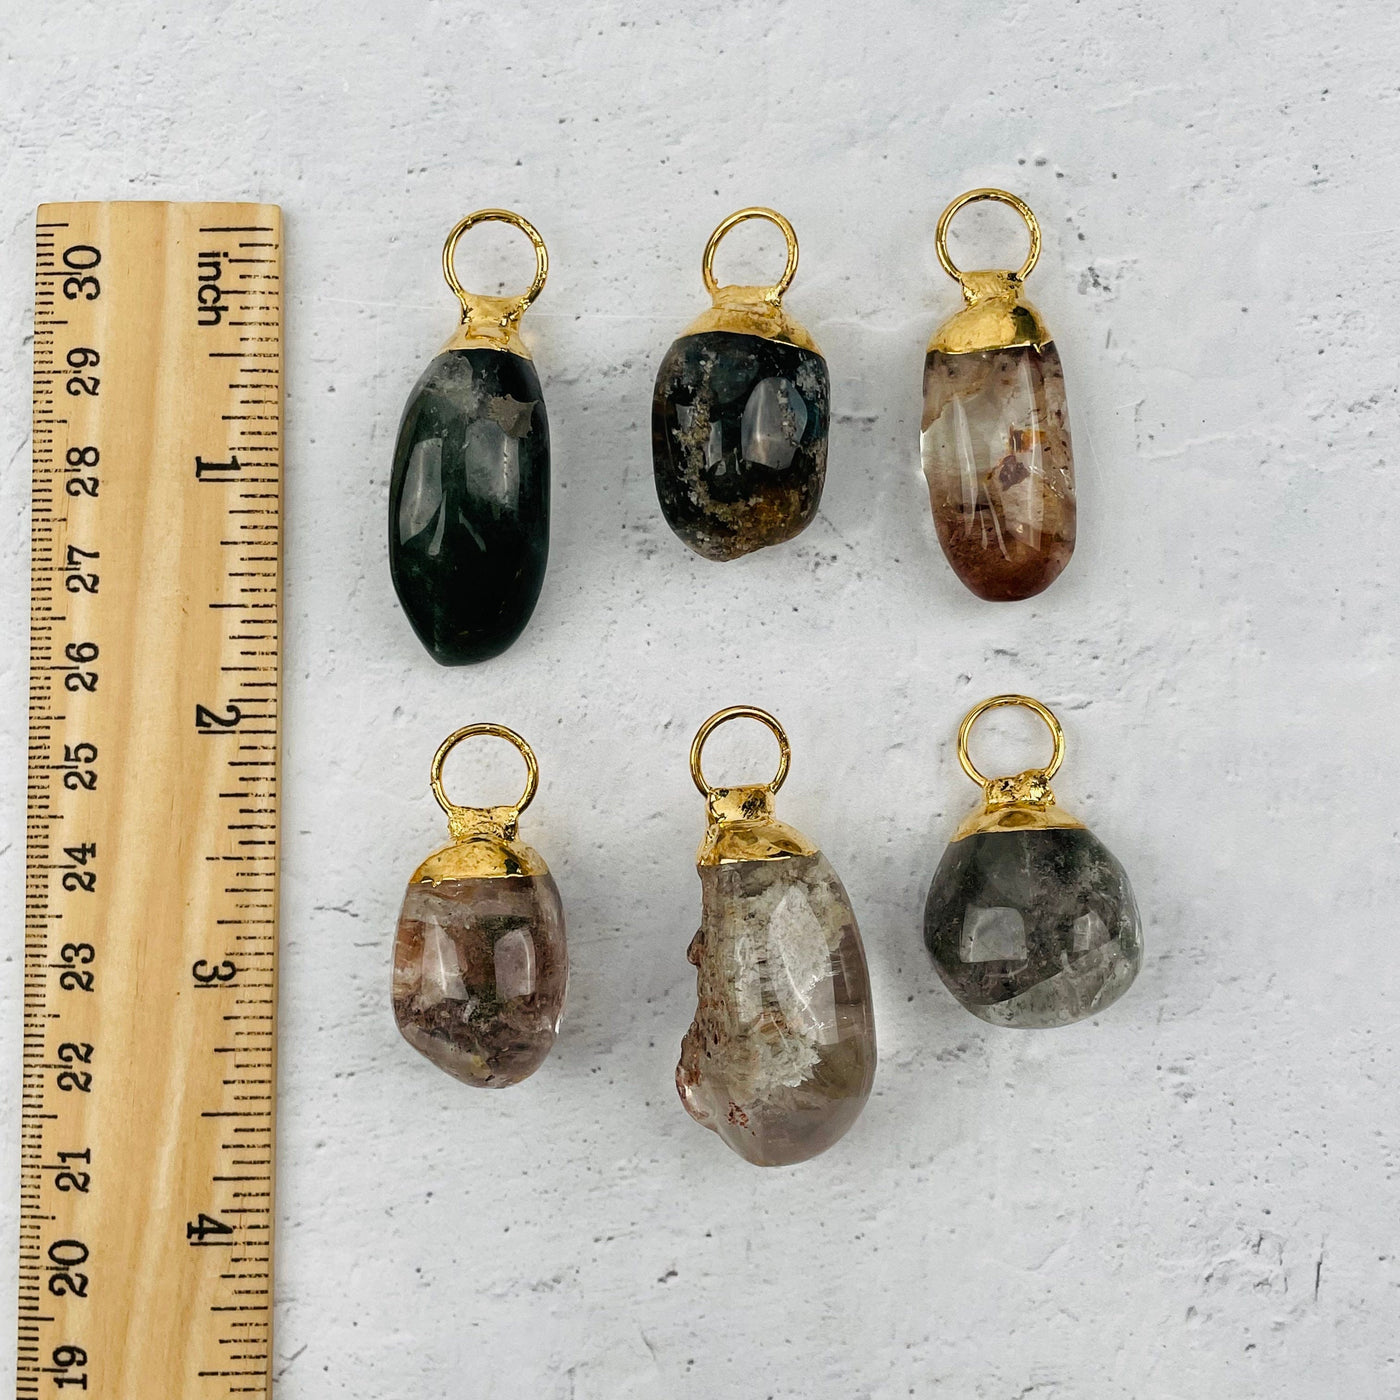 pendants next to a ruler for size reference 